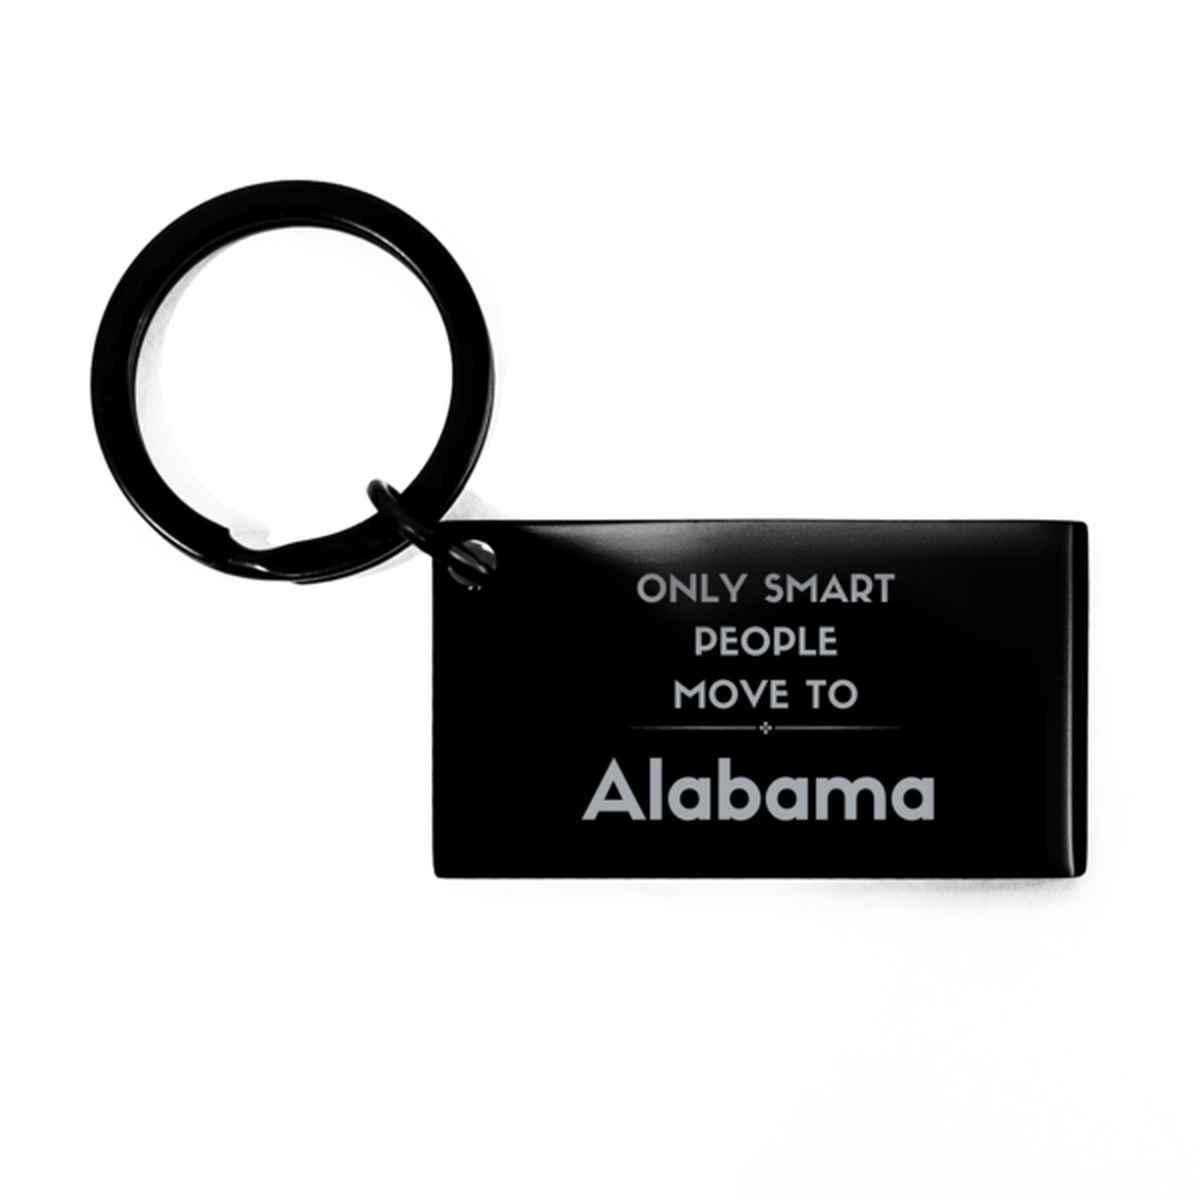 Only smart people move to Alabama Keychain, Gag Gifts For Alabama, Move to Alabama Gifts for Friends Coworker Funny Saying Quote